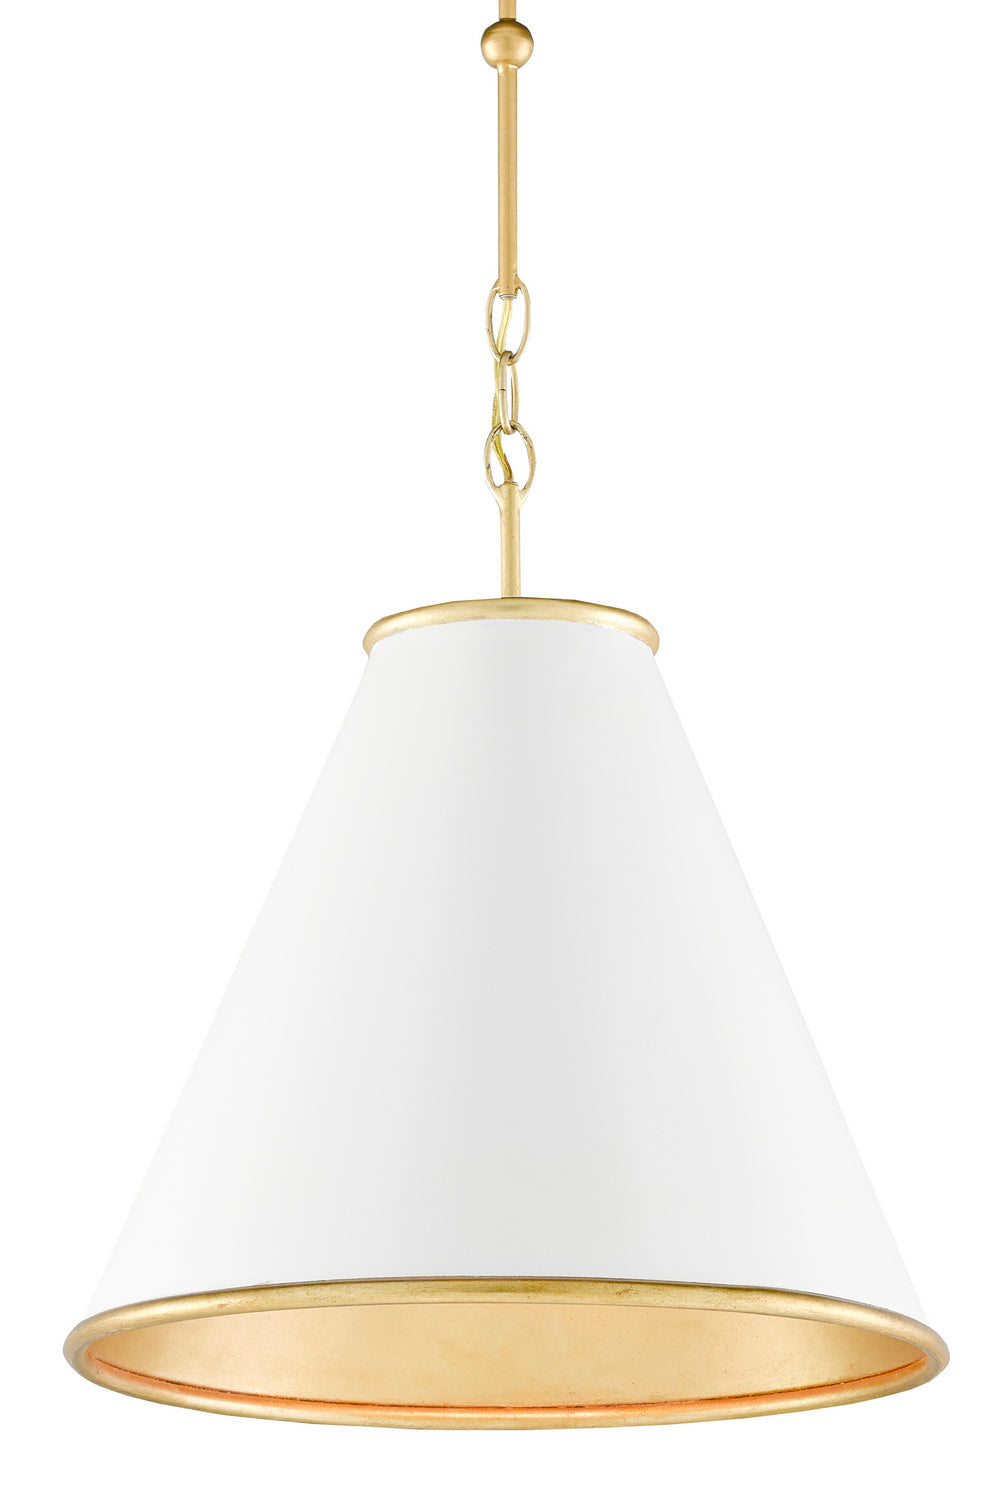 Currey and Company - One Light Pendant - Pierrepont - Painted Gesso White/Contemporary Gold Leaf/Painted Gold- Union Lighting Luminaires Decor